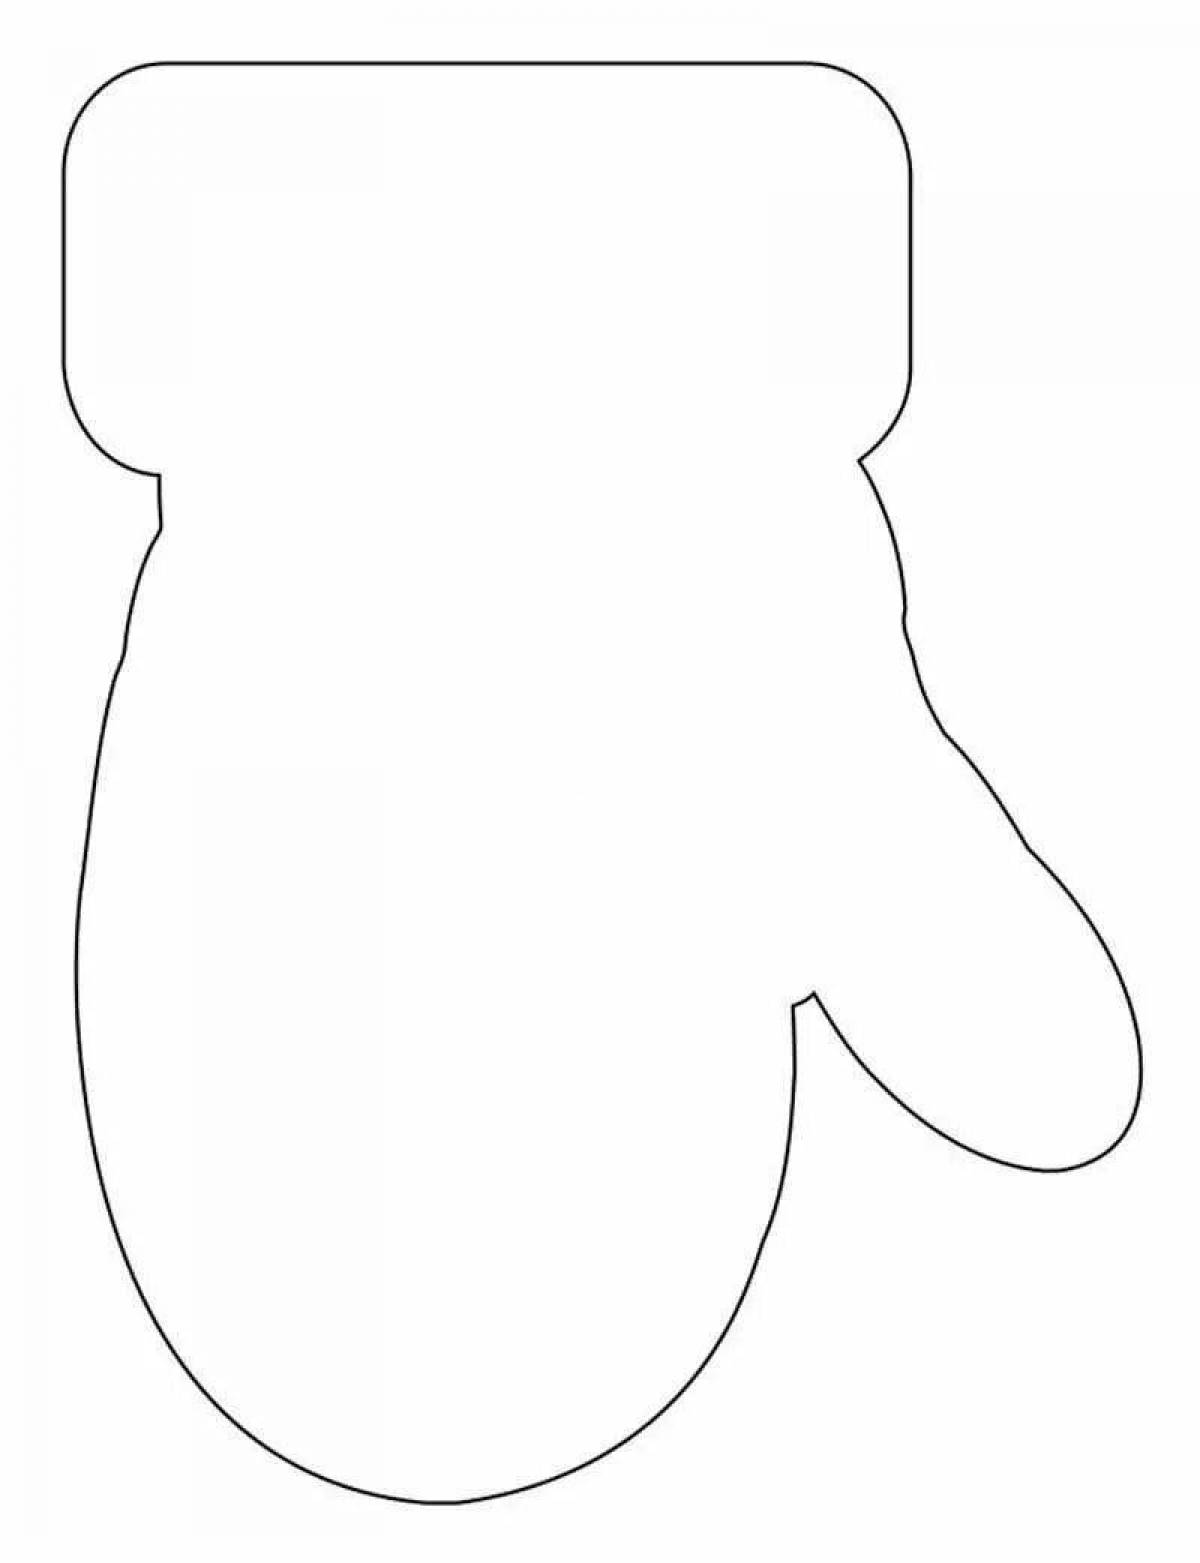 Santa's playful mitten coloring page